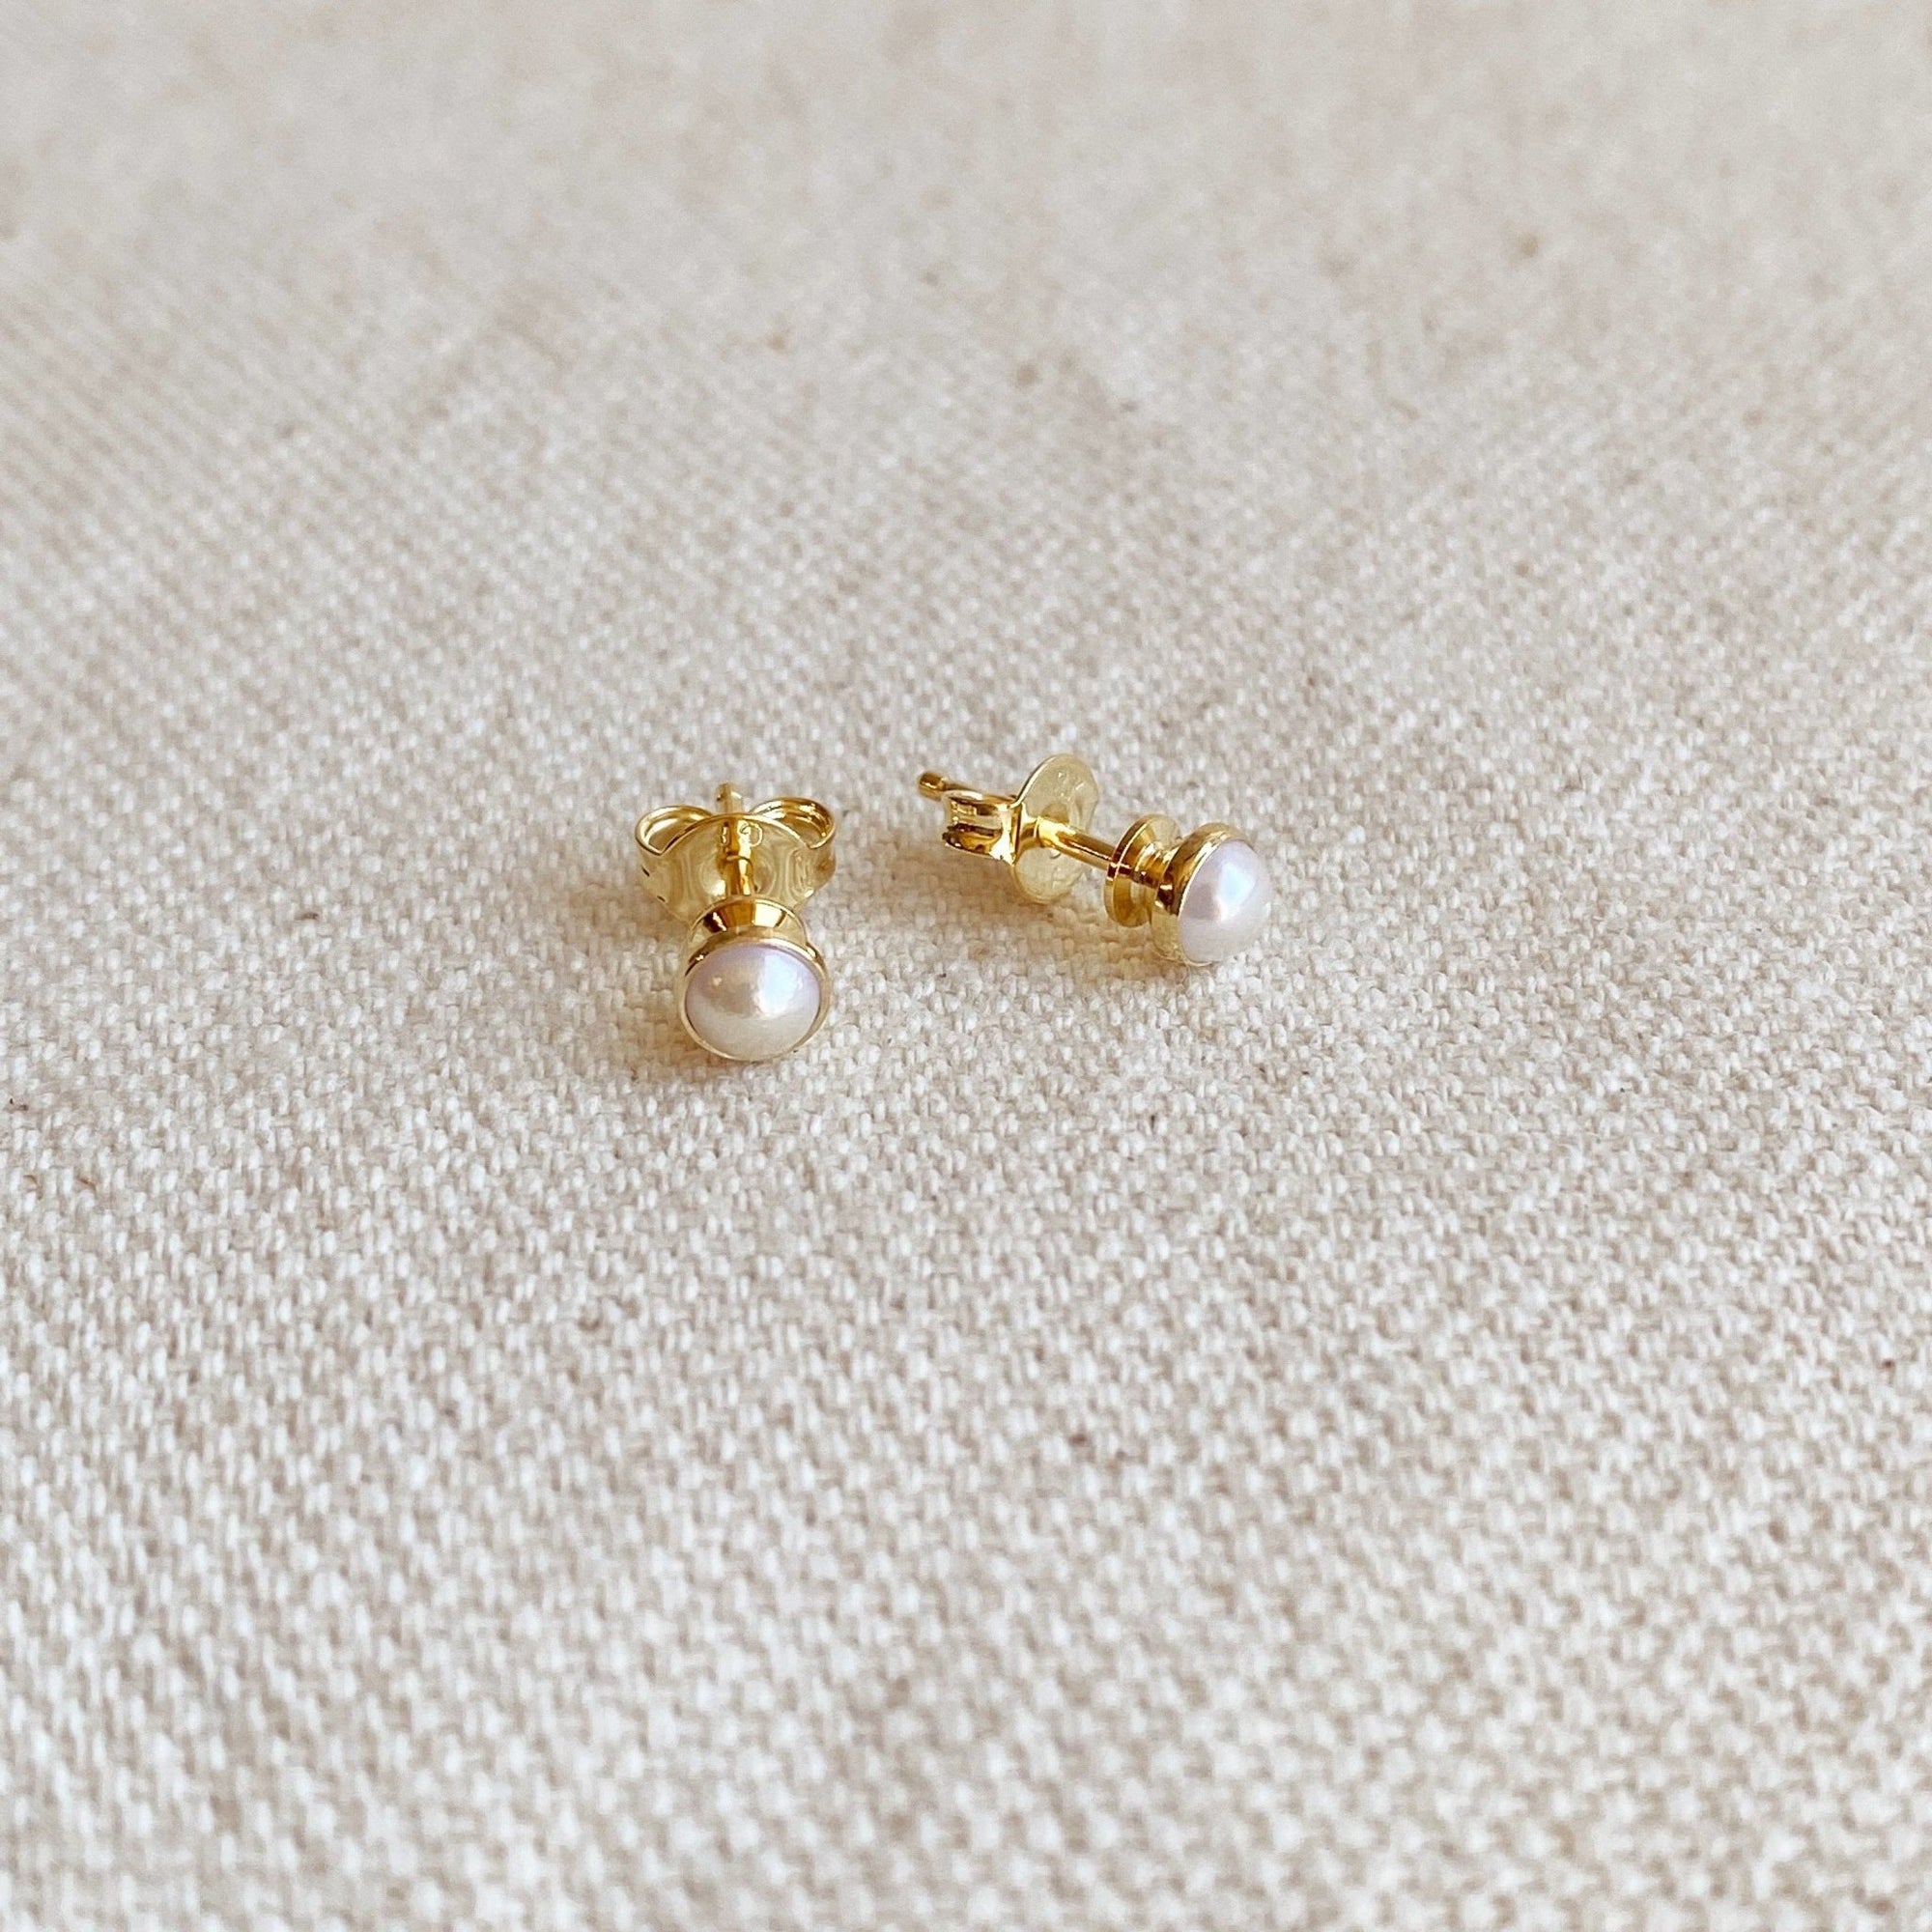 4mm Simulated Pearl Stud Earrings, 18k Gold Filled - Abigail Fox Designs